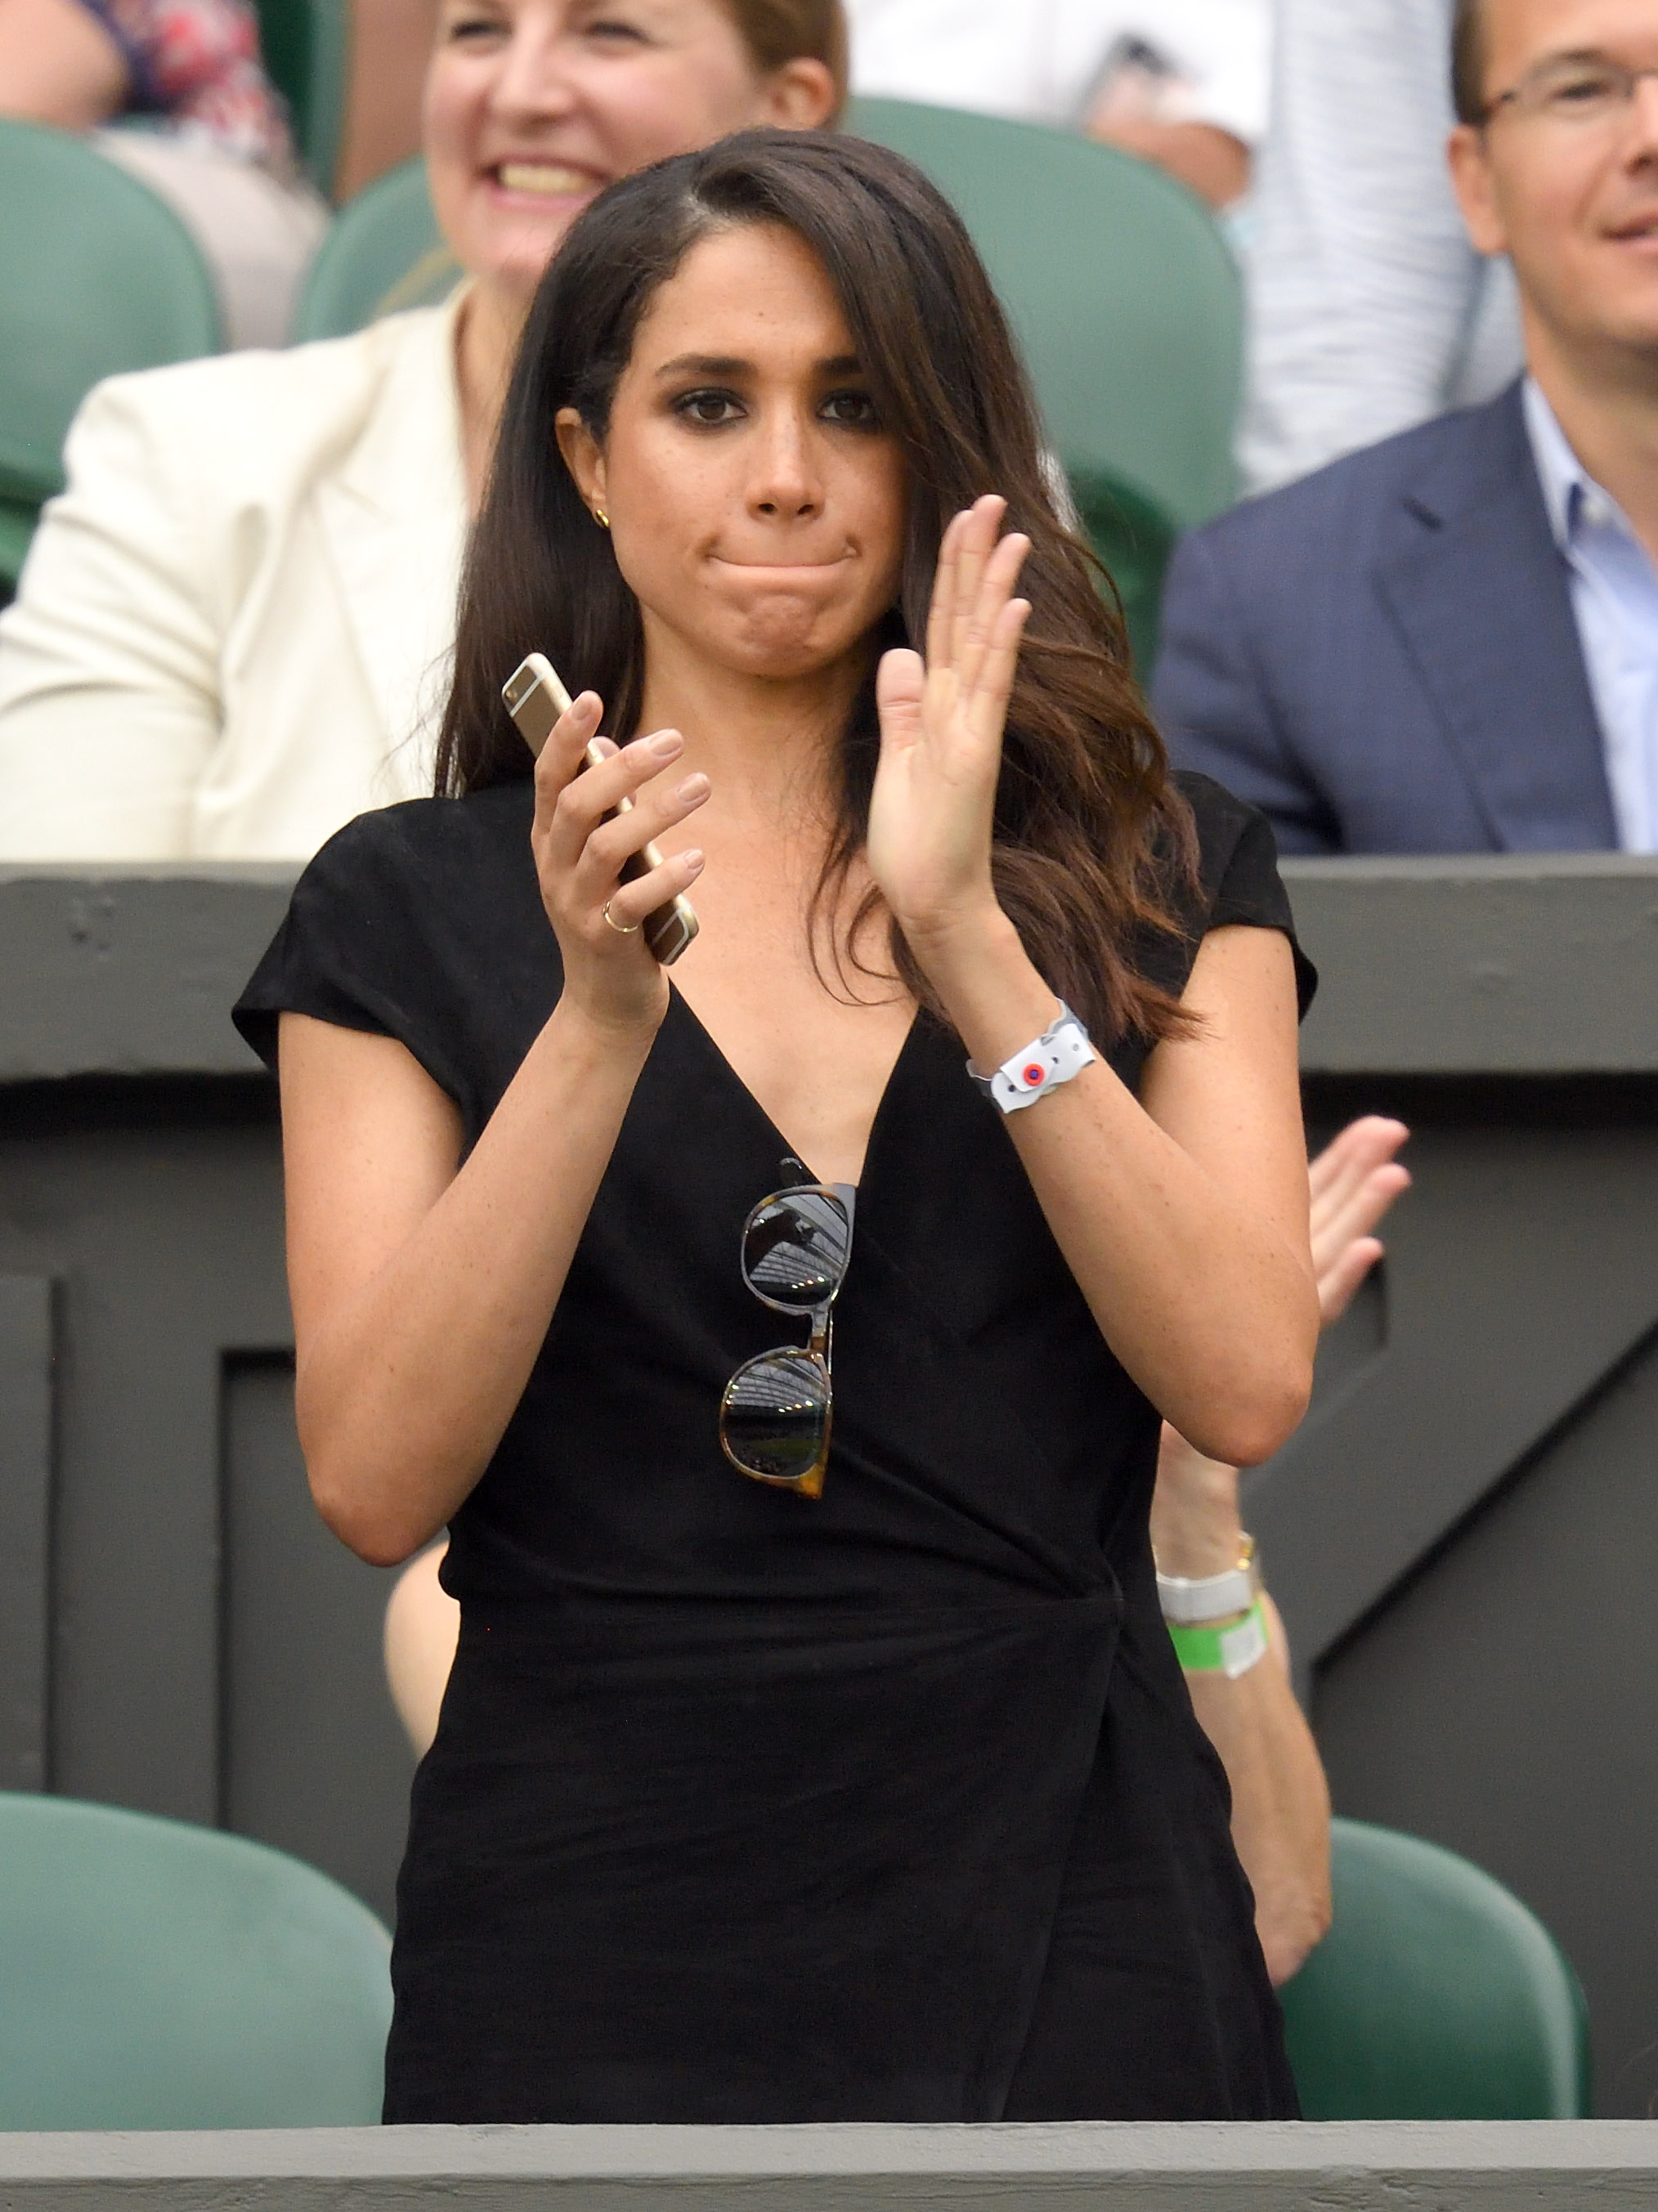 Meghan Markle attends day eight of the Wimbledon Tennis Championships at Wimbledon on July 4, 2016 in London, England. | Source: Getty Images